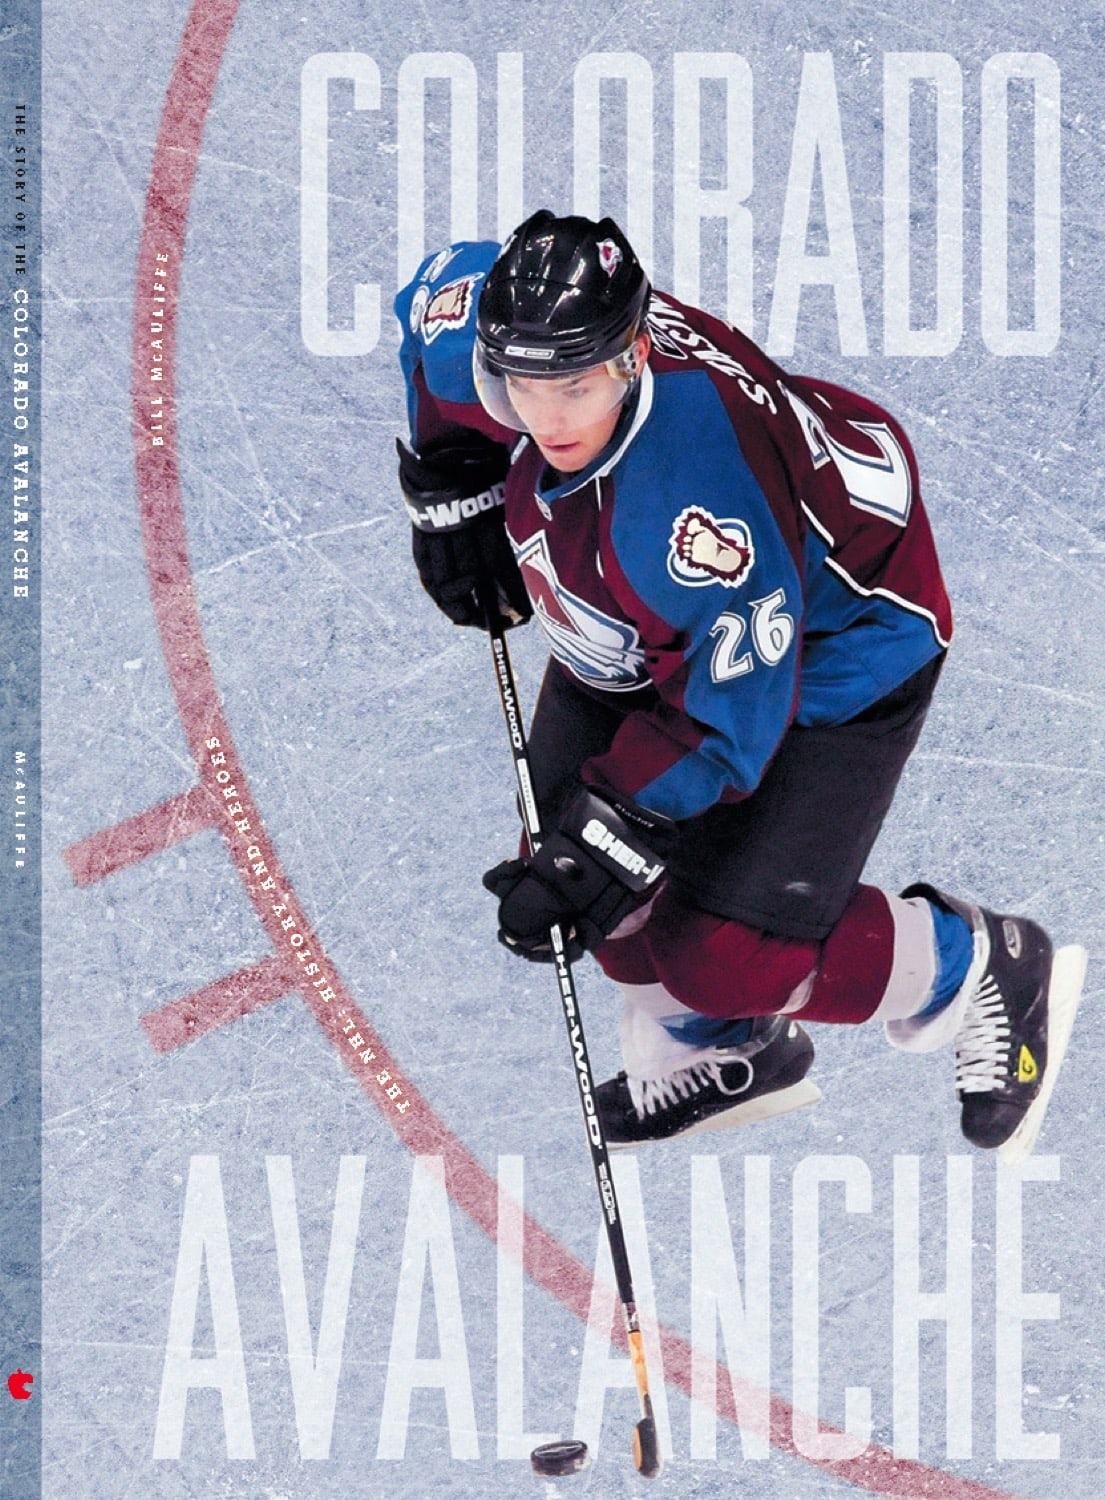 The NHL: History and Heroes: The Story of the Colorado Avalanche